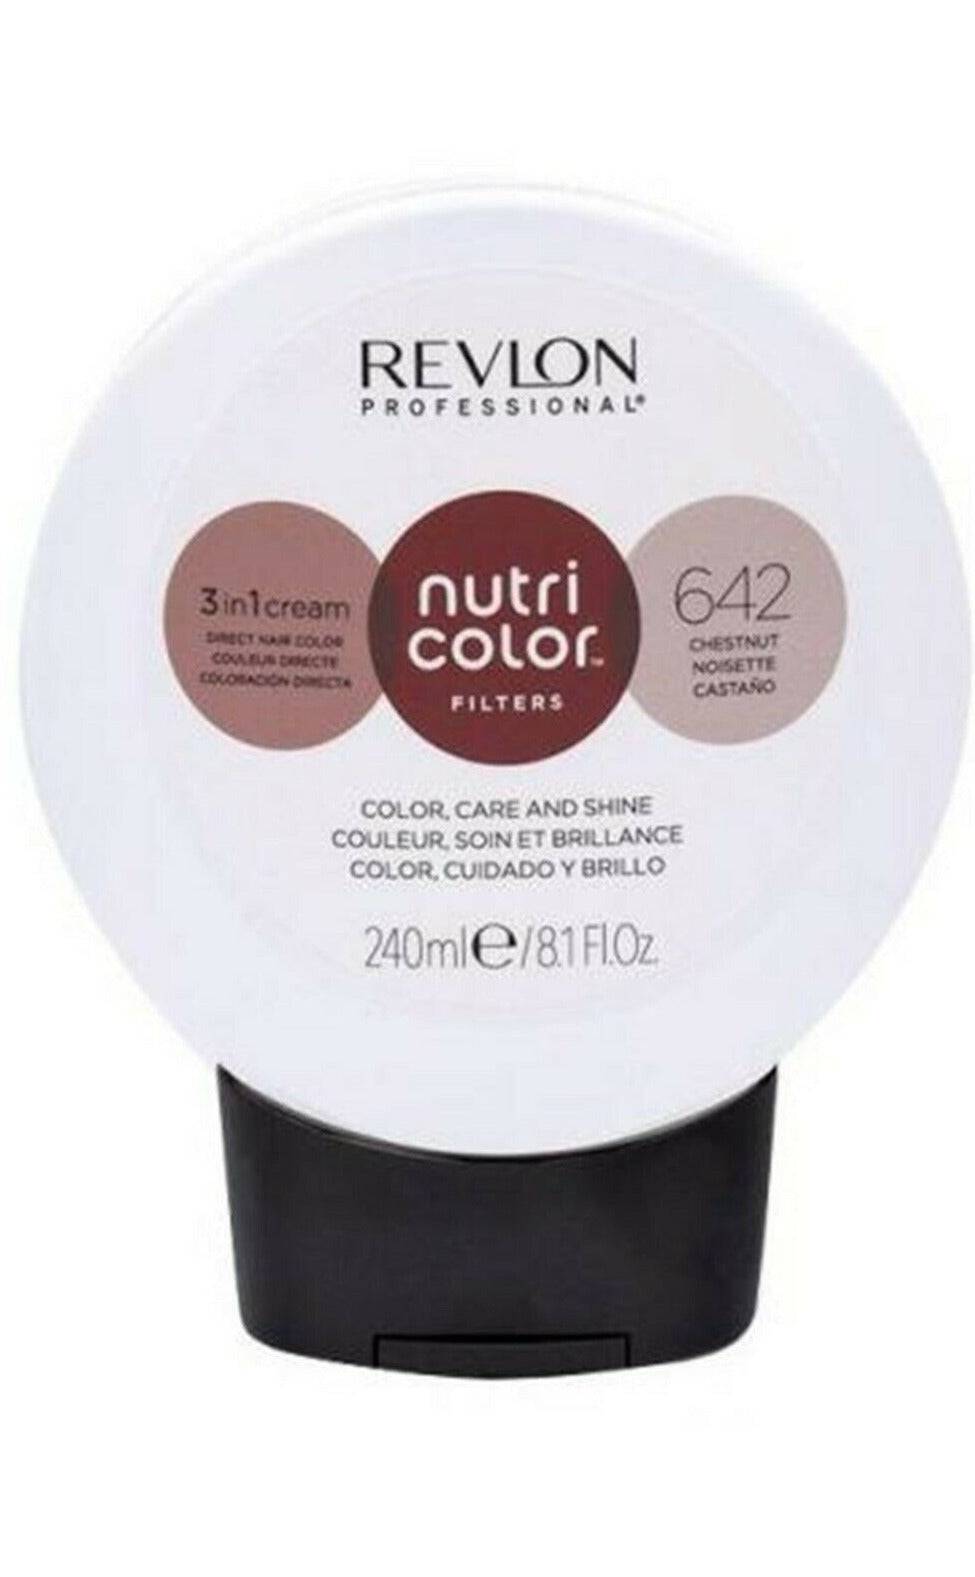 Revlon Professional Nutri Color Creme 3 in 1 Cream #500 Purple Red 240ml - On Line Hair Depot